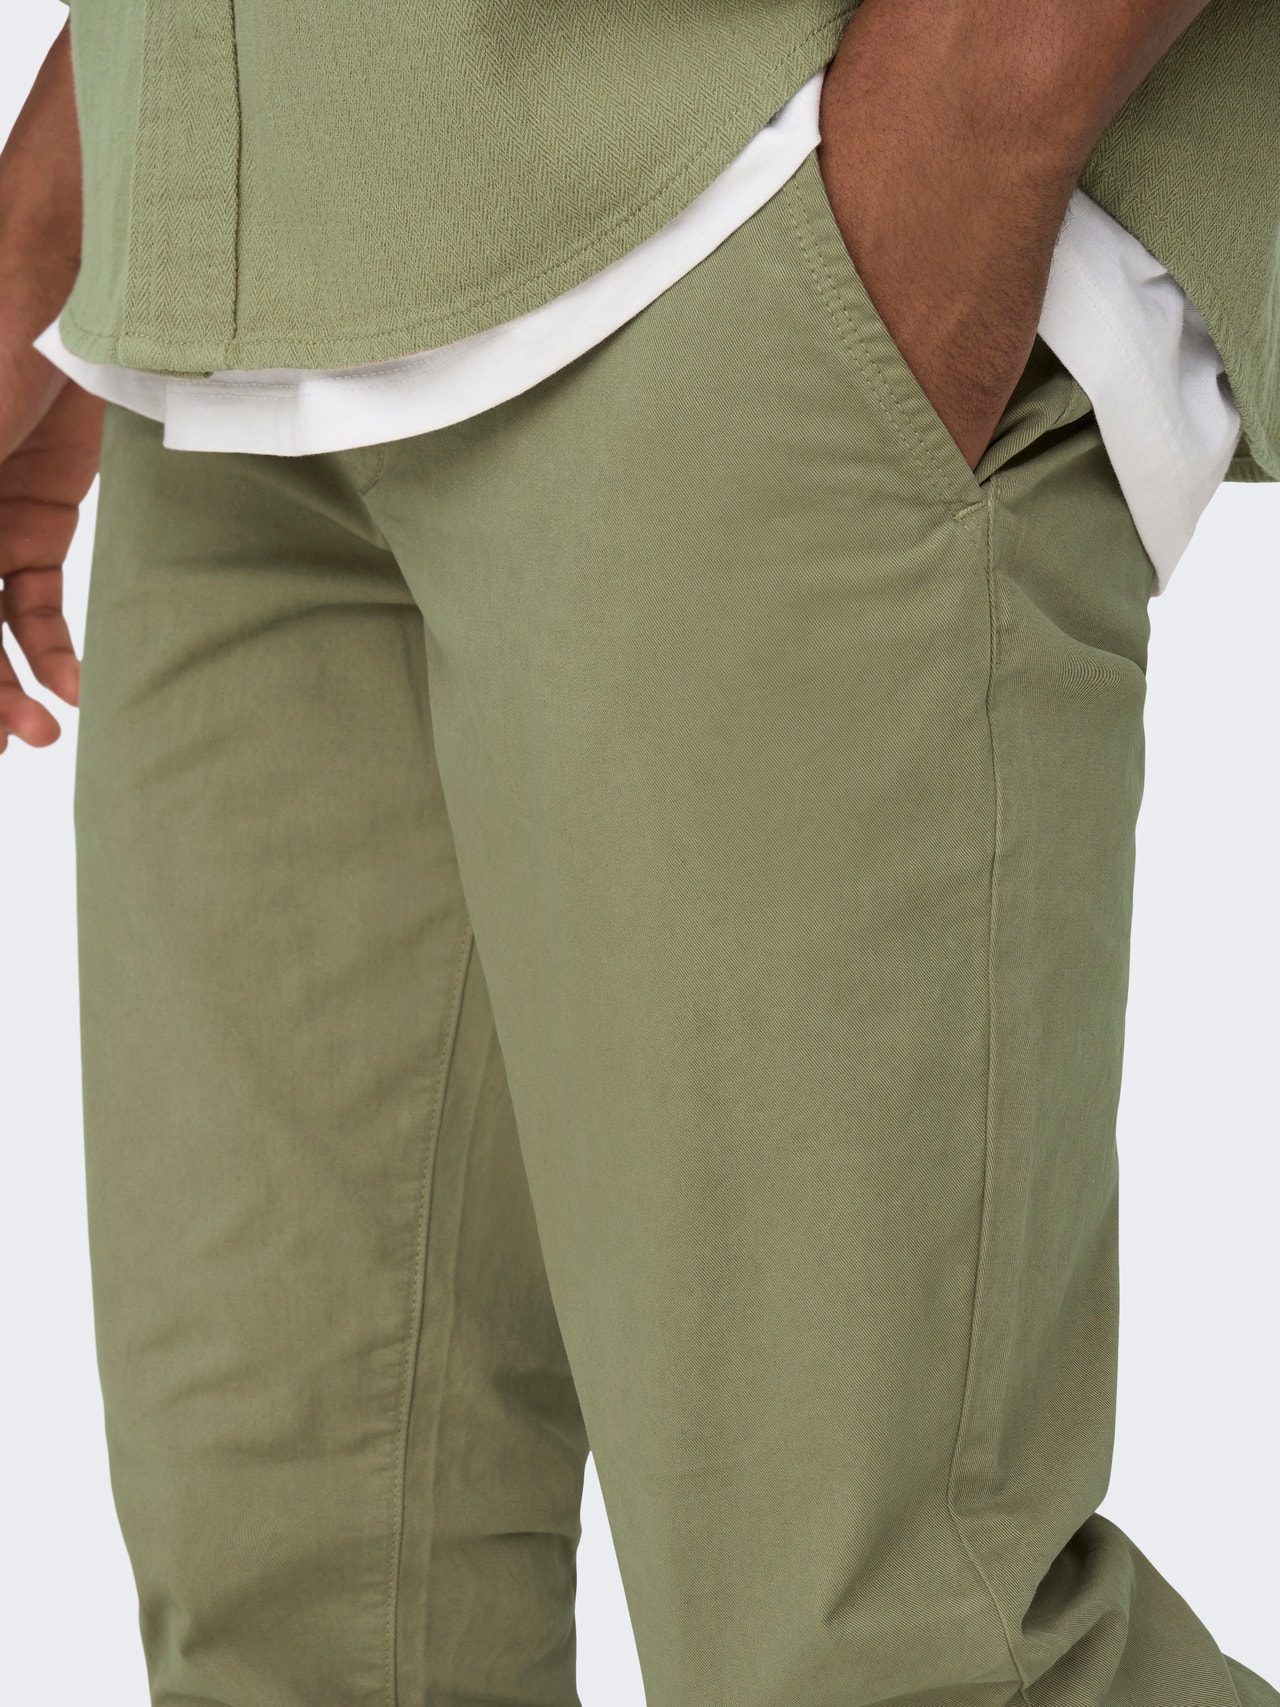 ONLY & SONS Slim fit chinos -Mermaid - 22023323